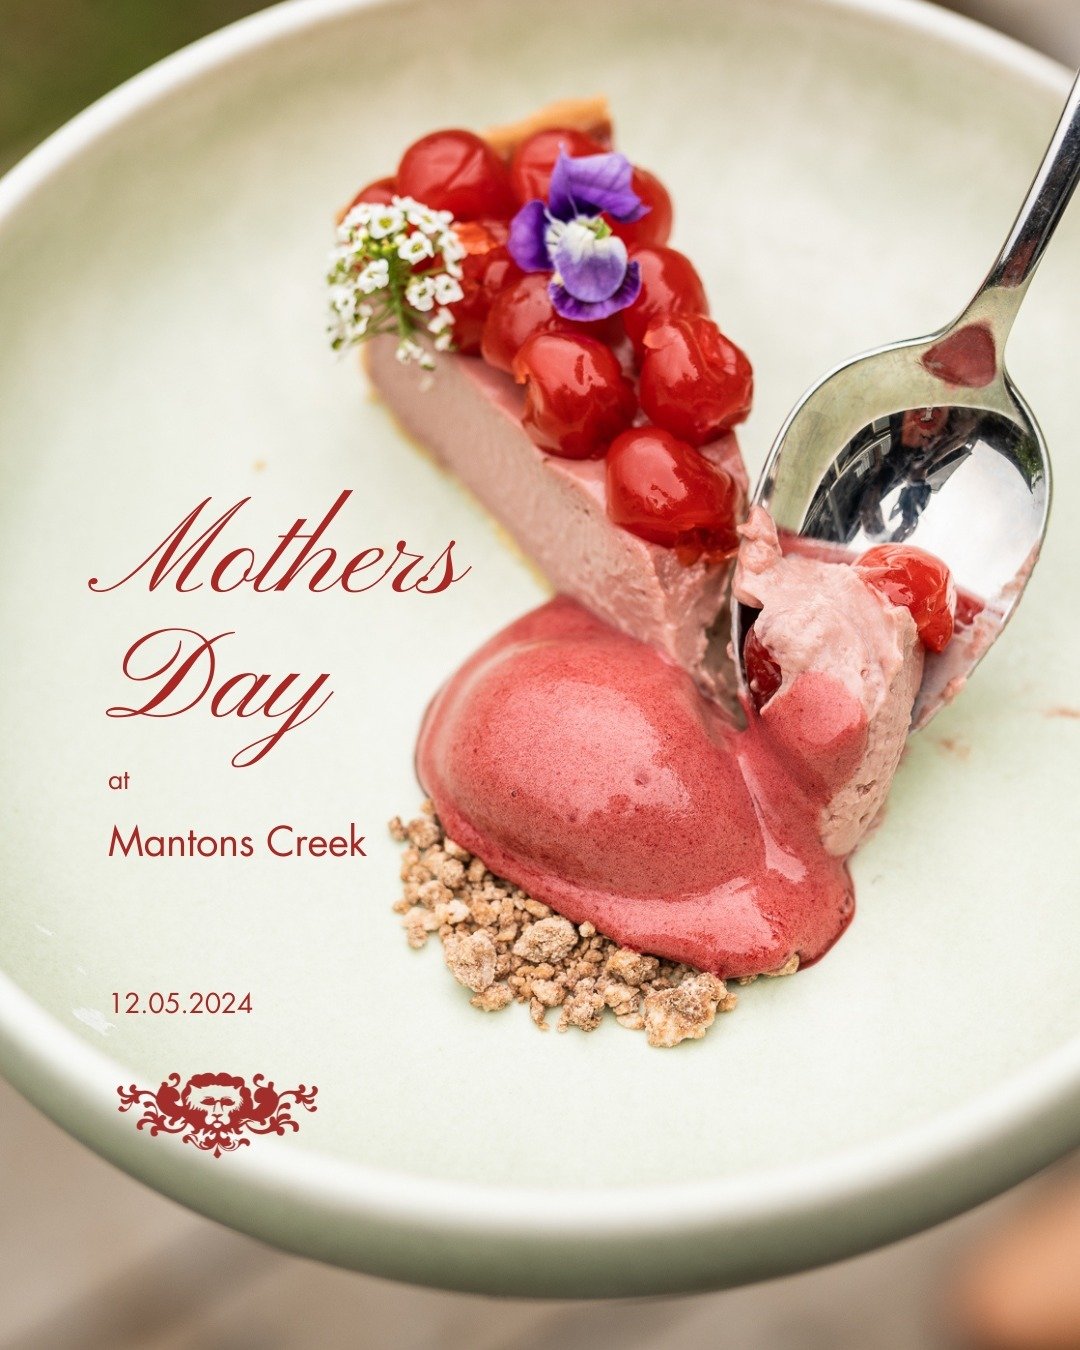 Spend Mothers Day with us &amp; @theepicurean_mantonscreek⁠
⁠
Dine at Quattro 🍴⁠
Book via our website, bookings essential⁠
----------⁠
Wine in the Cellar Door 🍷⁠
Bookings &amp; walk-ins welcome ⁠
⁠
#morningtonpeninsula #mpwine #wine #cellardoor #re